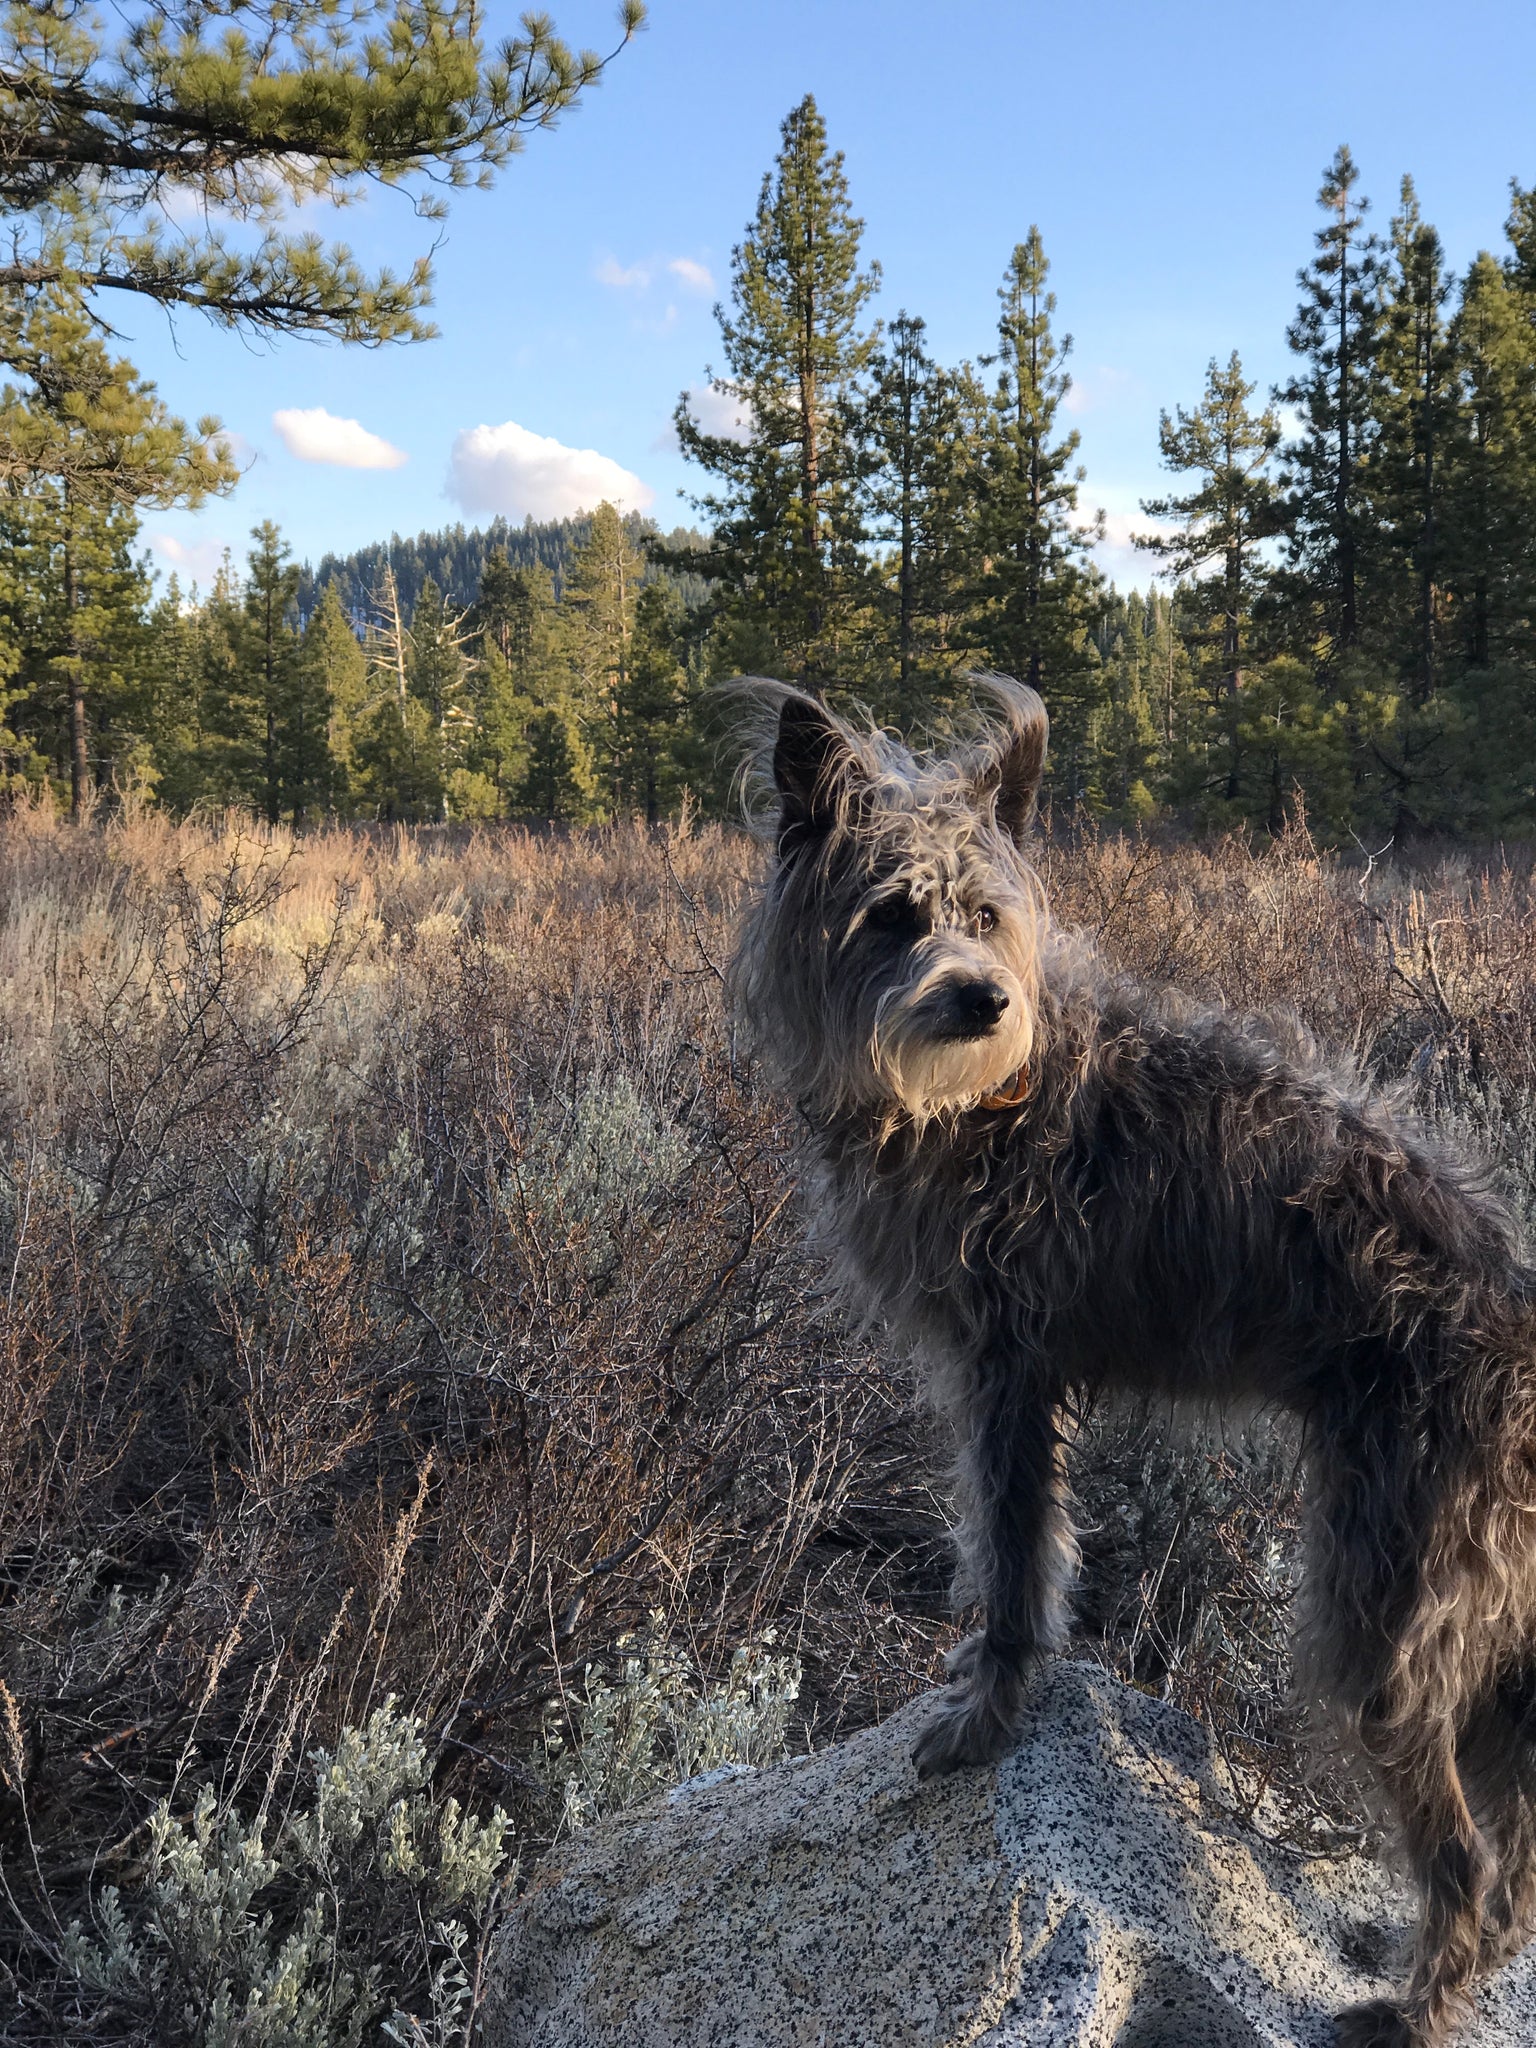 Picture of a scruffy terrier type dog standing on a rock with the background of a forest